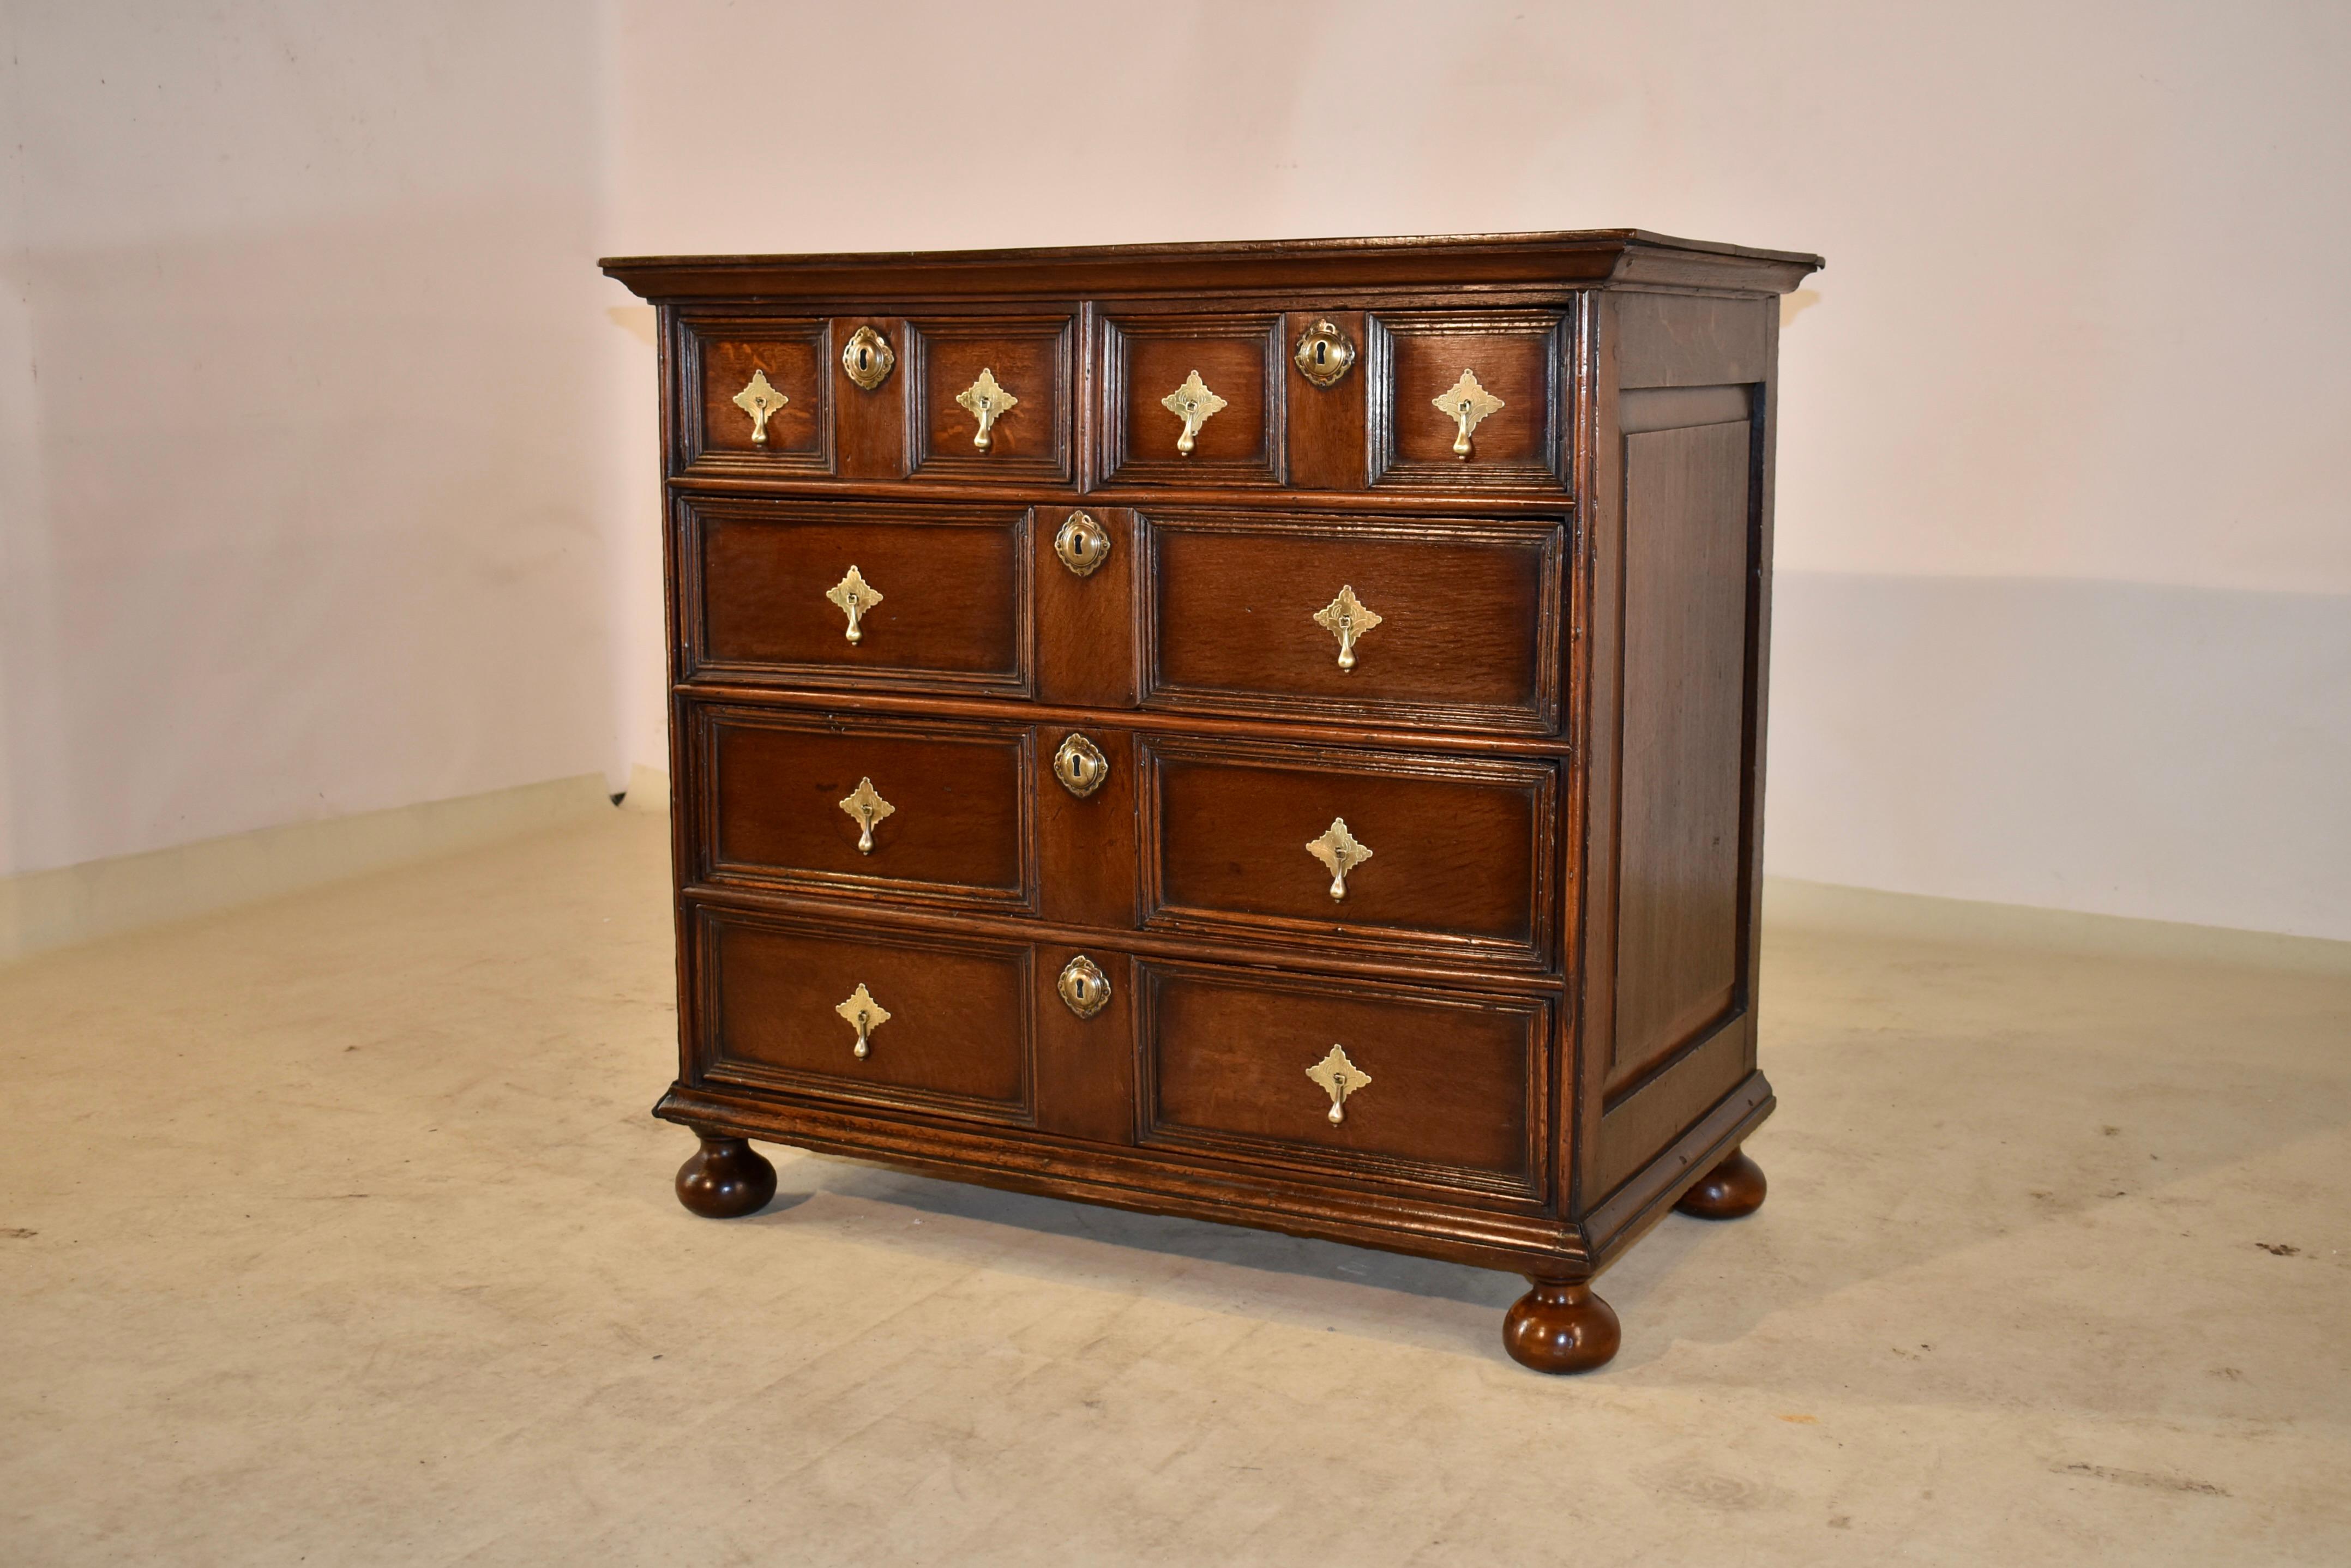 English Early 18th Century Paneled Chest of Drawers For Sale